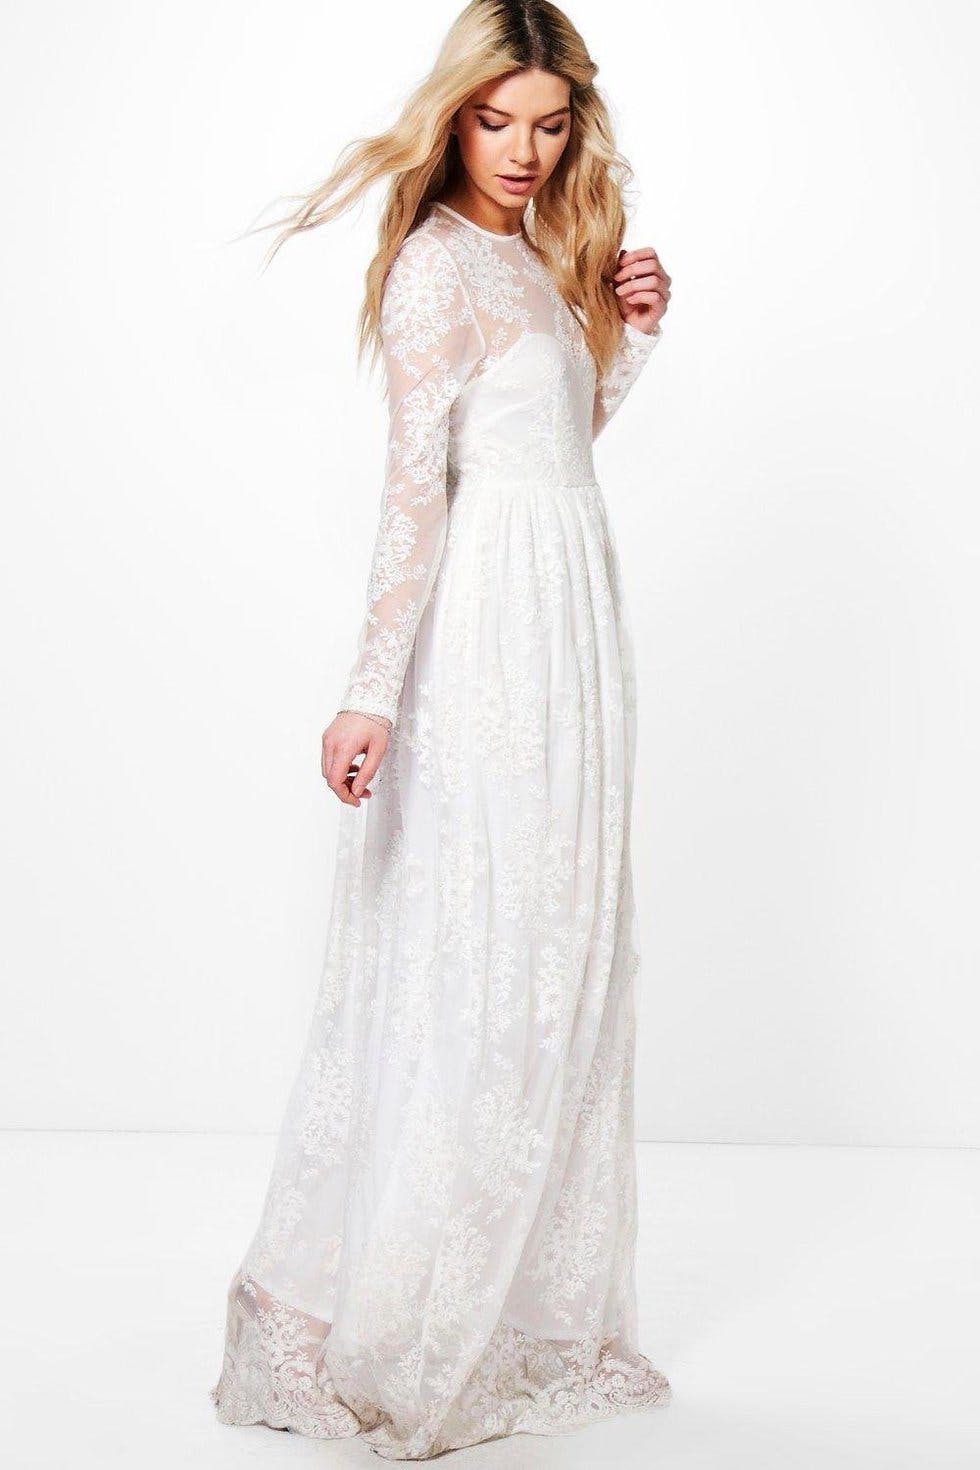 Boohoo is launching its own range of super-affordable wedding dresses